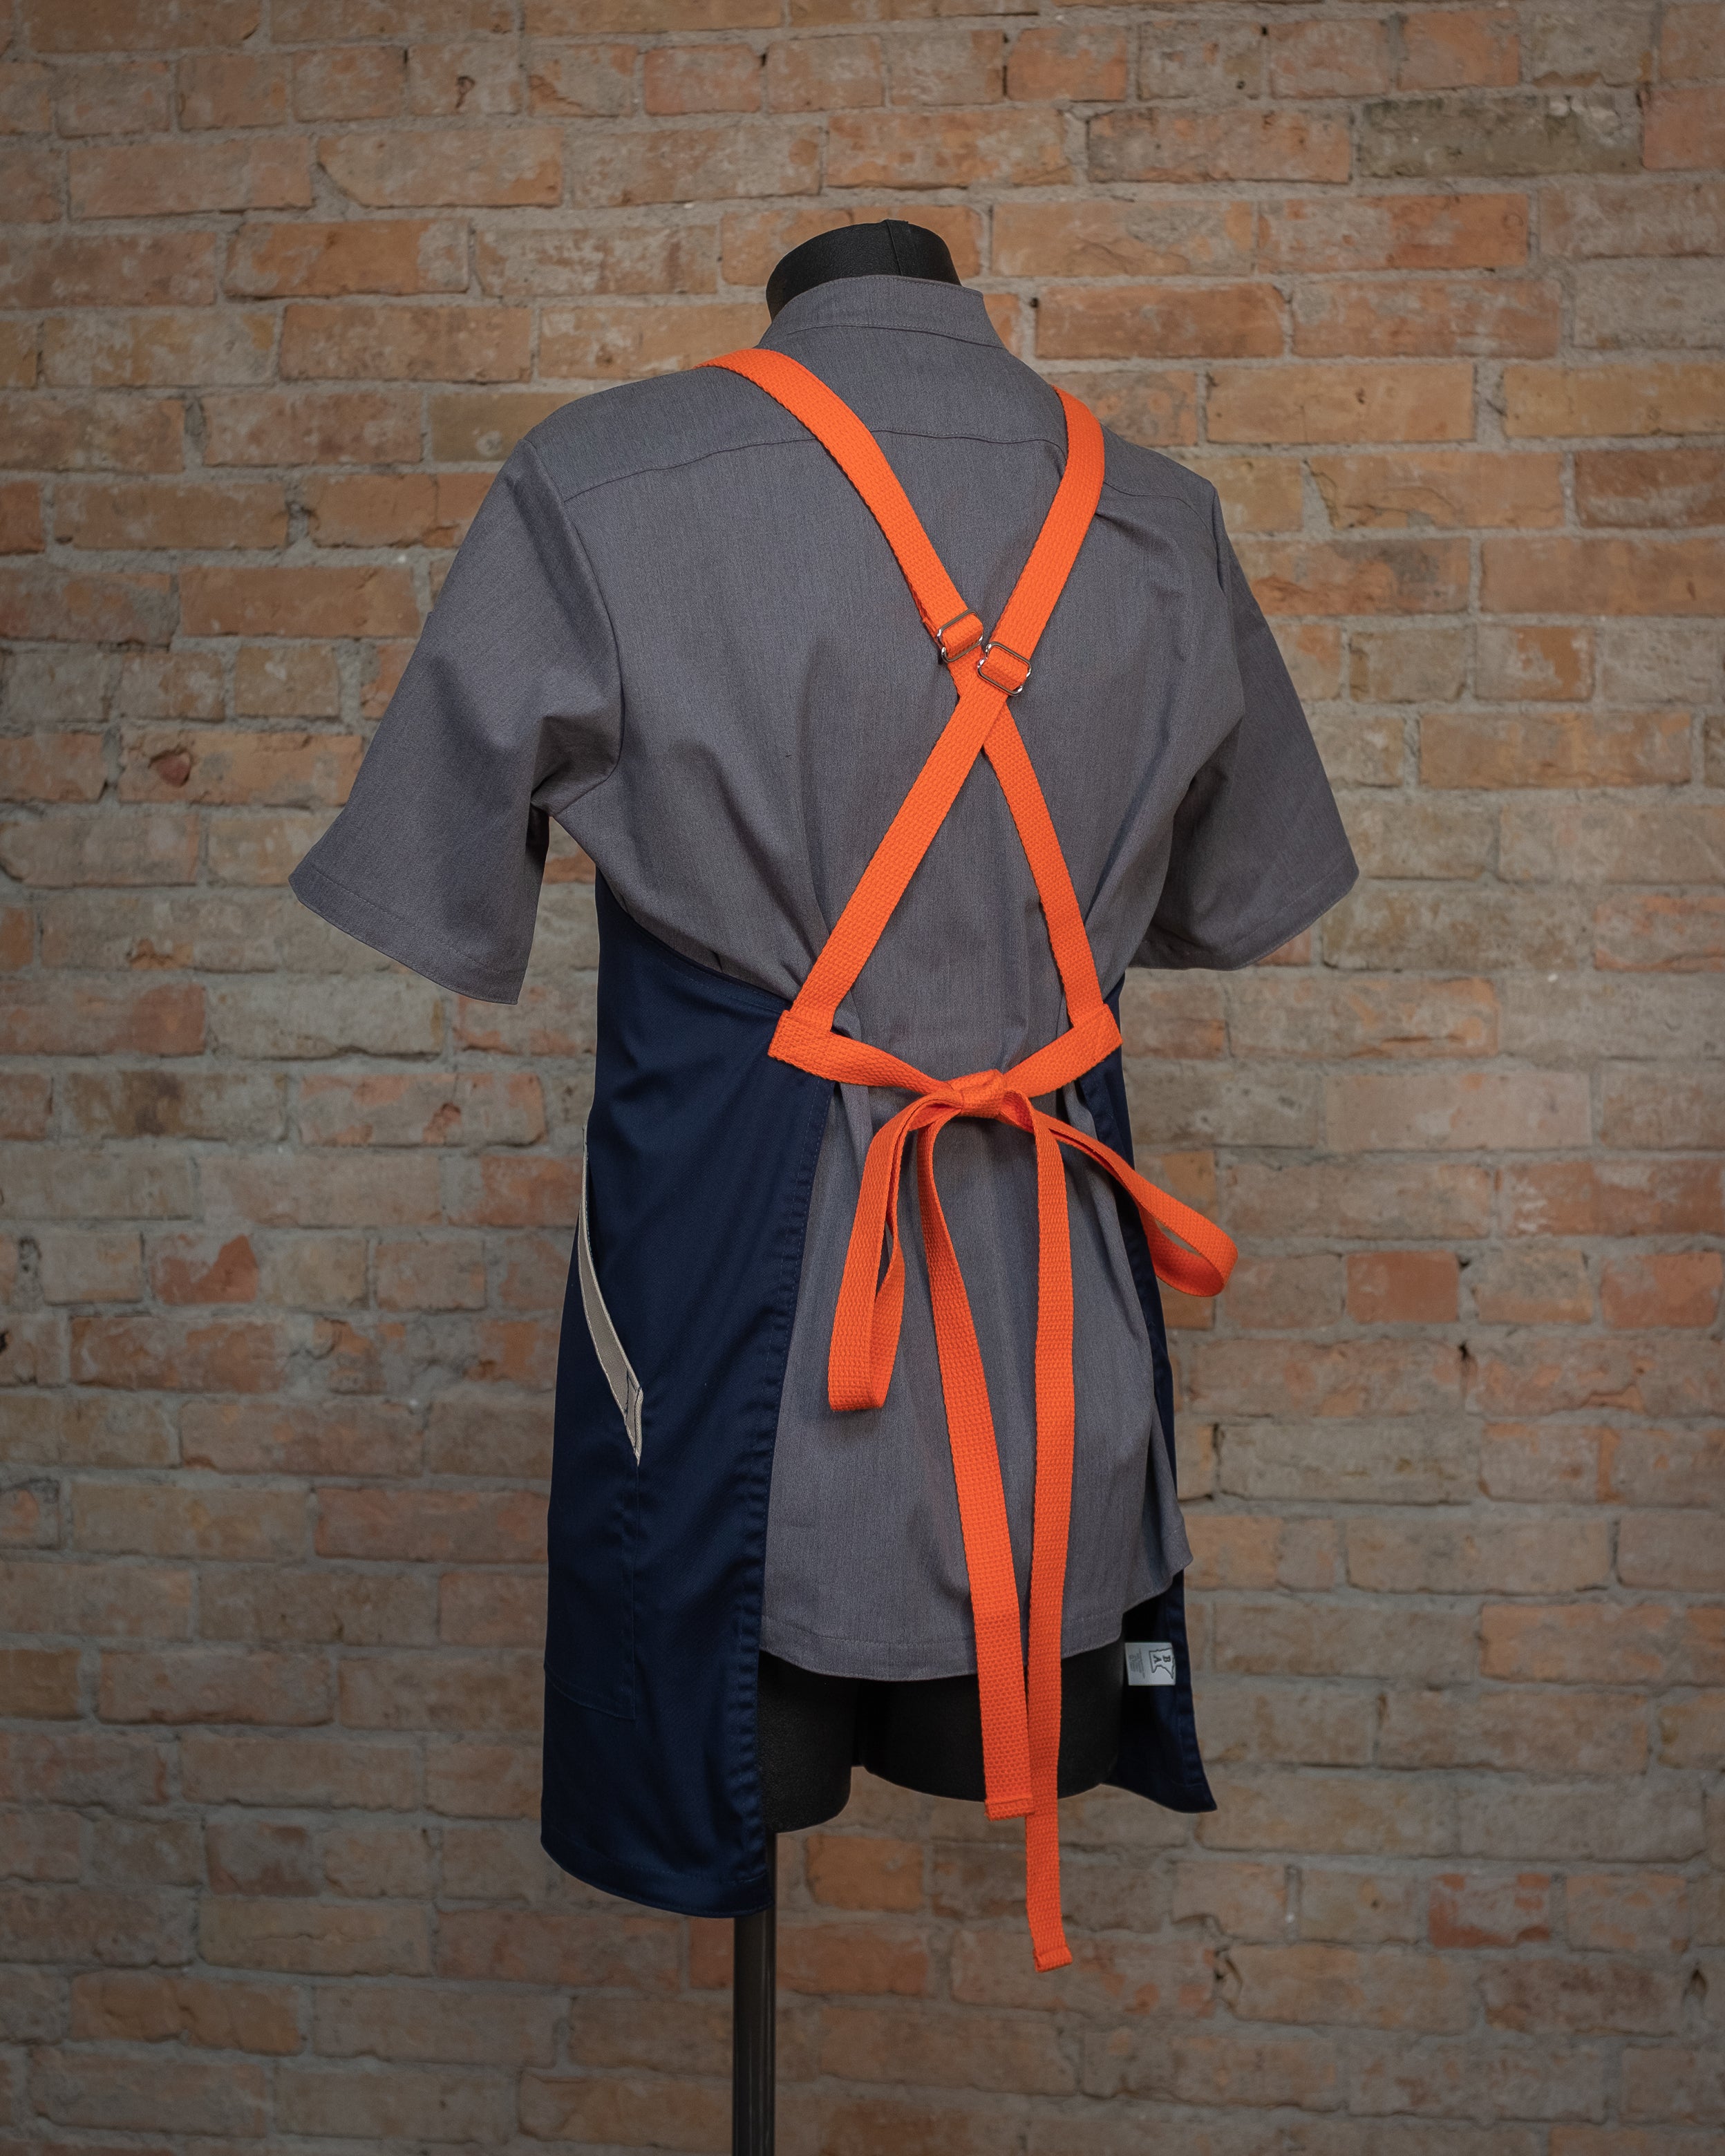 Blended fabric crossback apron from Craftmade Aprons, Minnesota, displayed on a mannequin over a gray chef coat. The apron 'Bert' is shown from the back, showing the orange crossback strapping in detail.